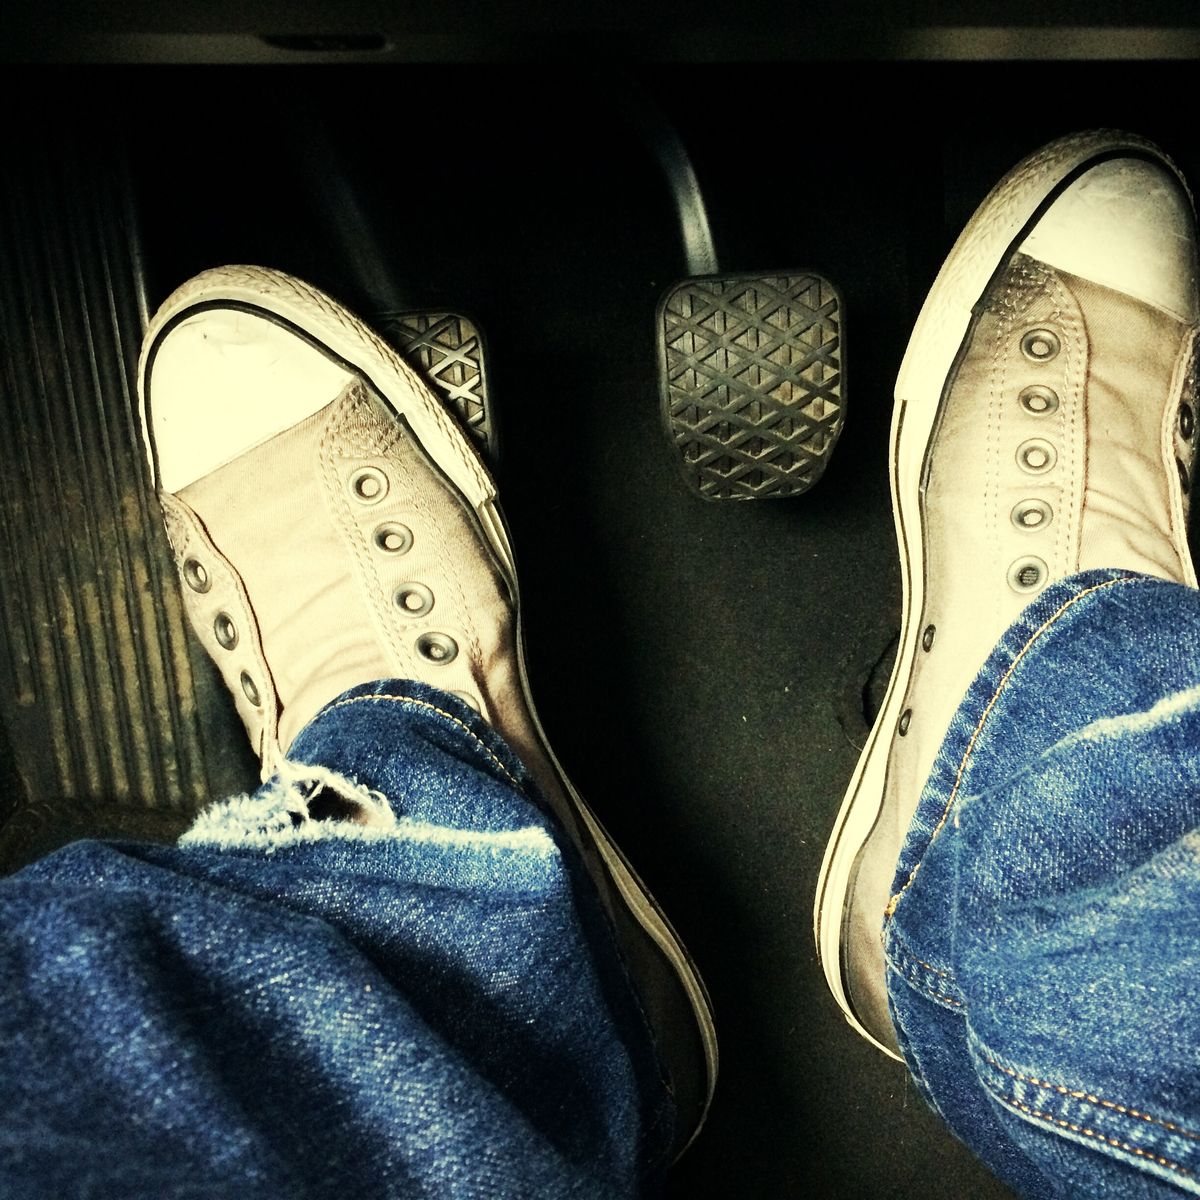 Which Pedal is the Clutch? » Learn Driving Tips